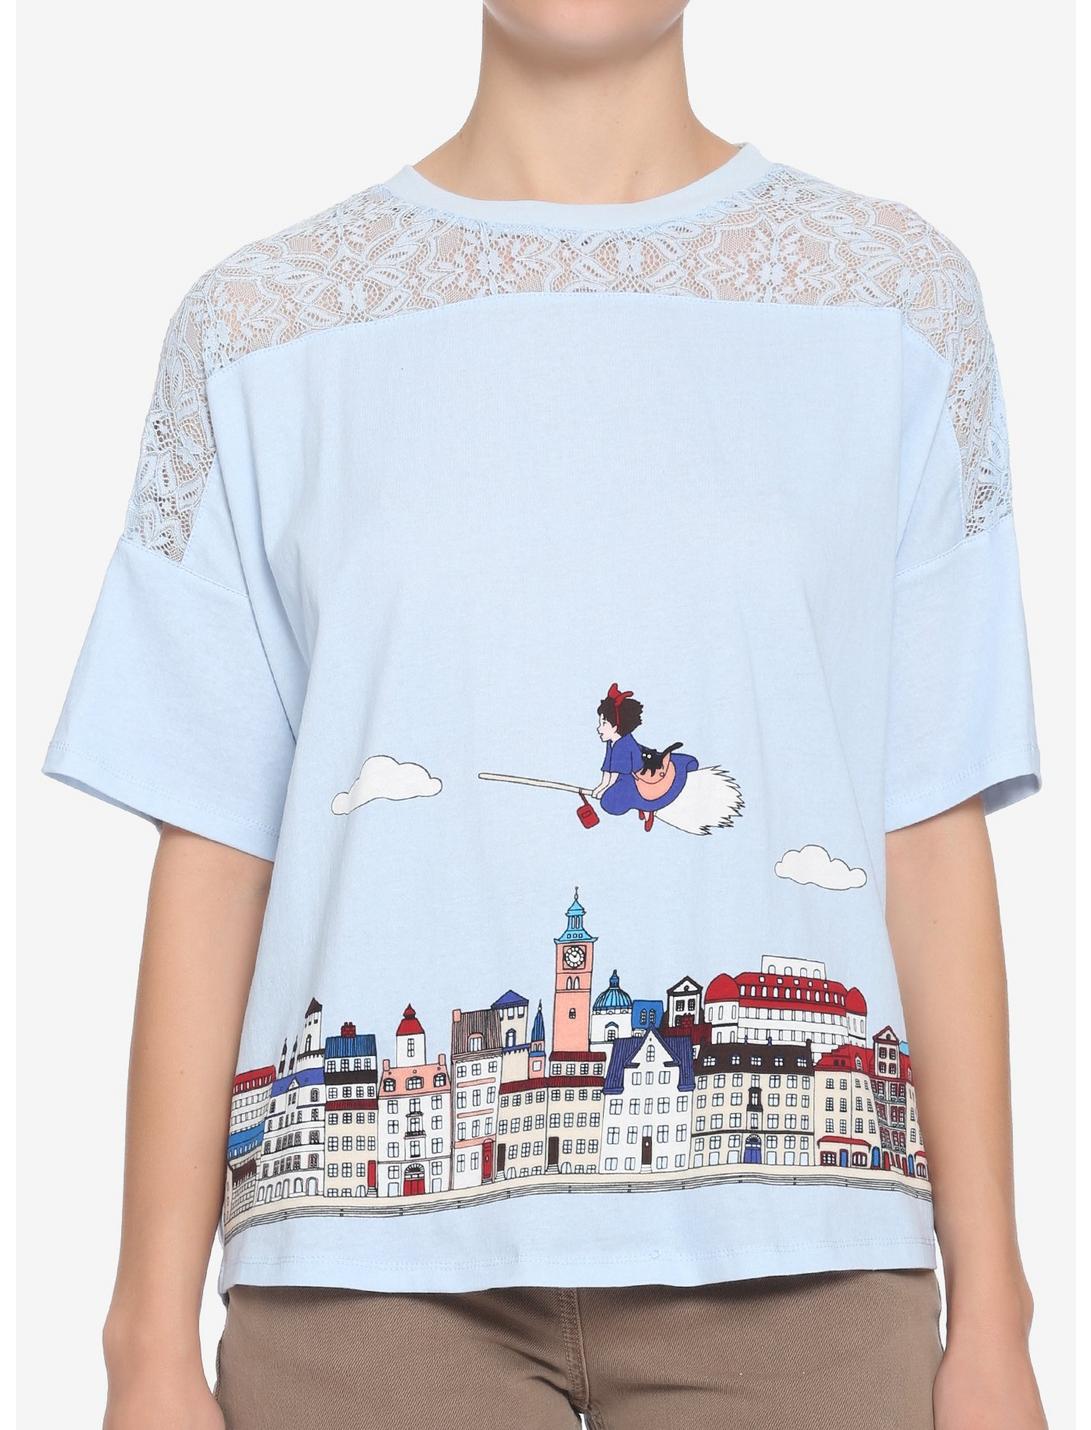 Her Universe Studio Ghibli Kiki's Delivery Service Town Lace Girls Top, MULTI, hi-res